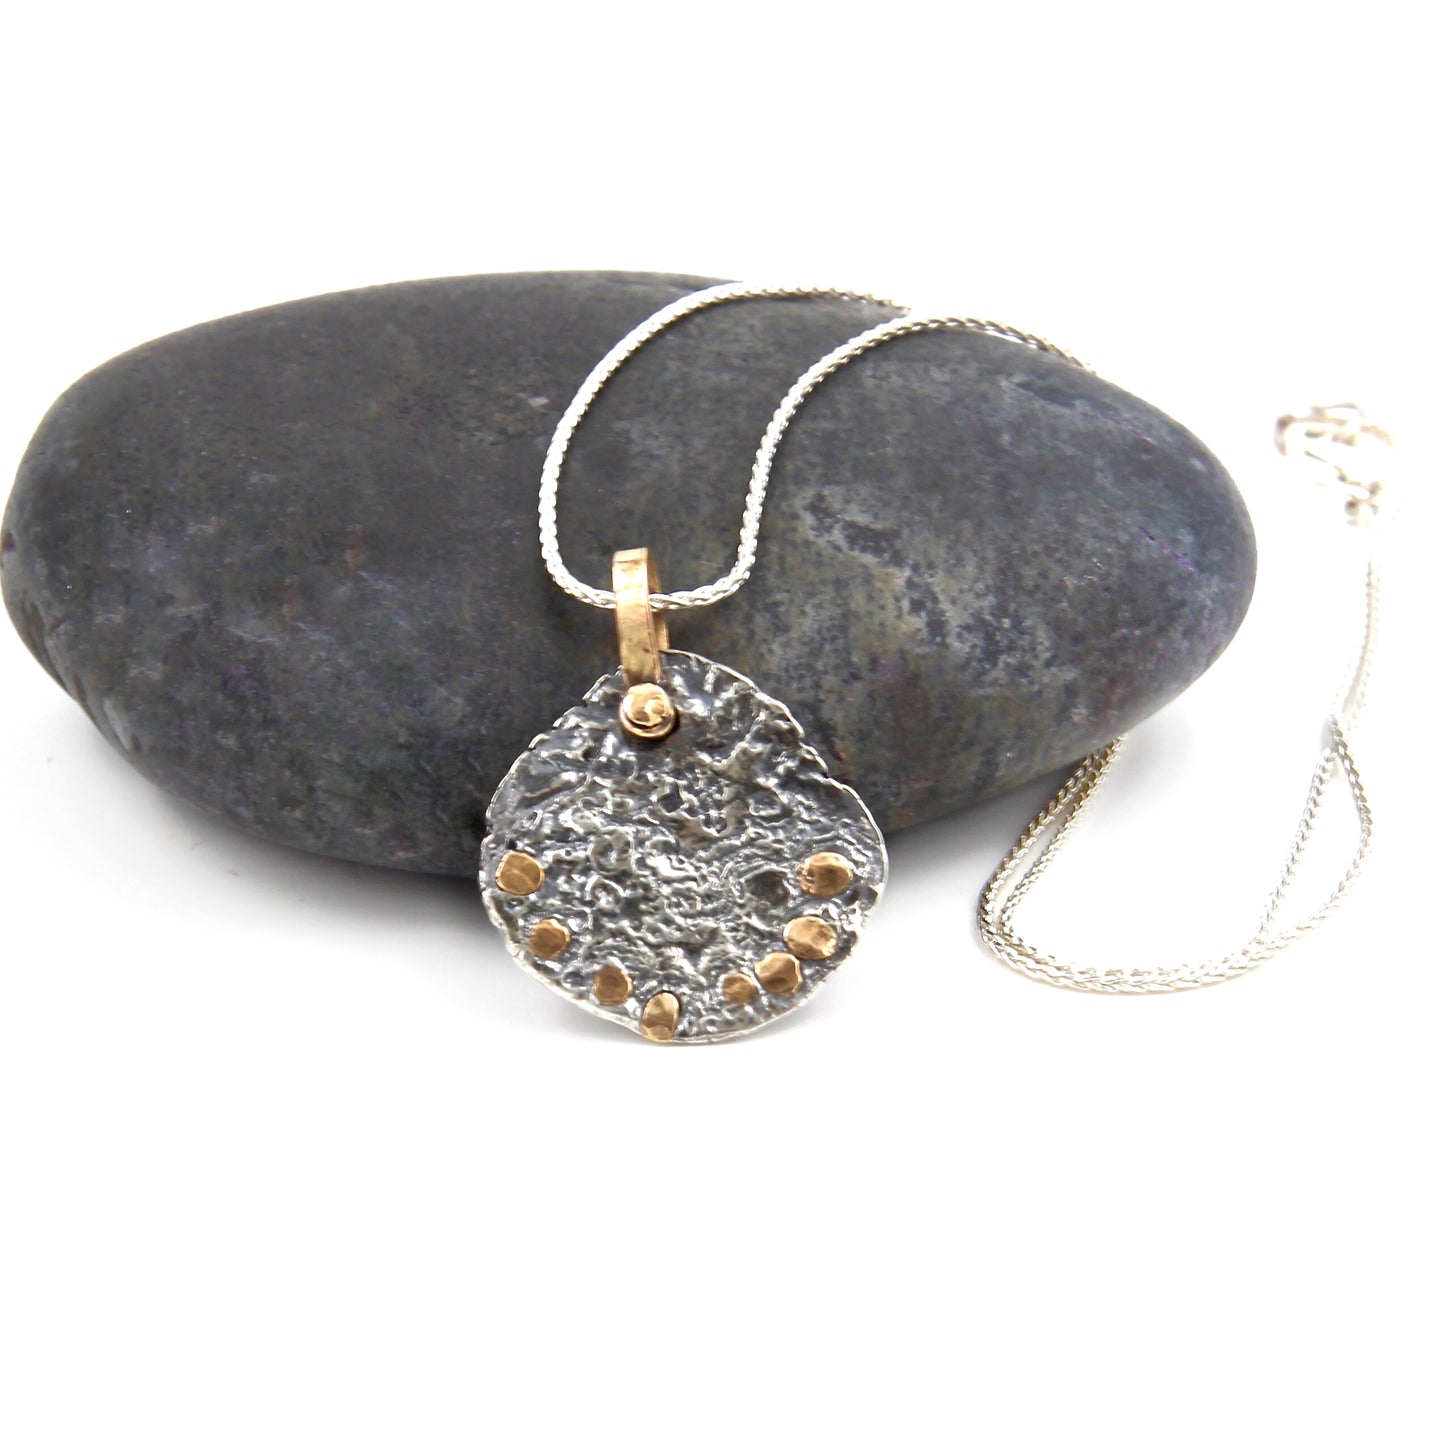 Organic Riveted Reticulated Silver Necklace - Milo Blue Designs